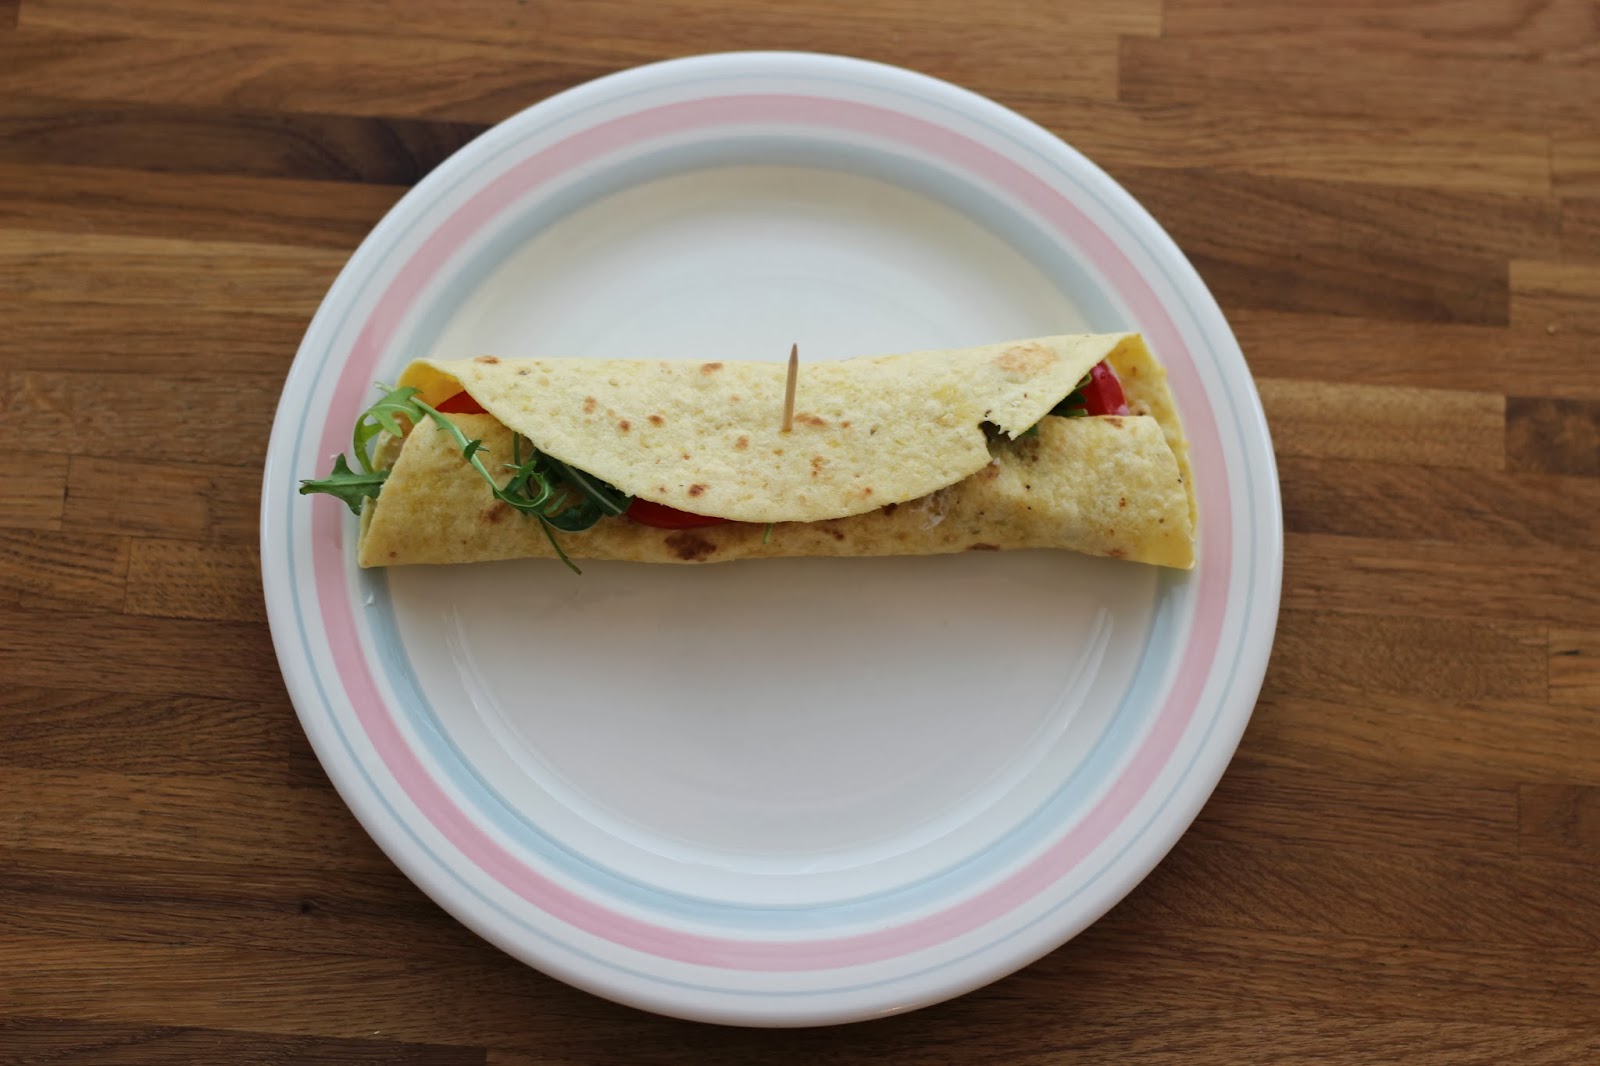 Tanned Beauty: Lunchtip: Koude tortilla wraps